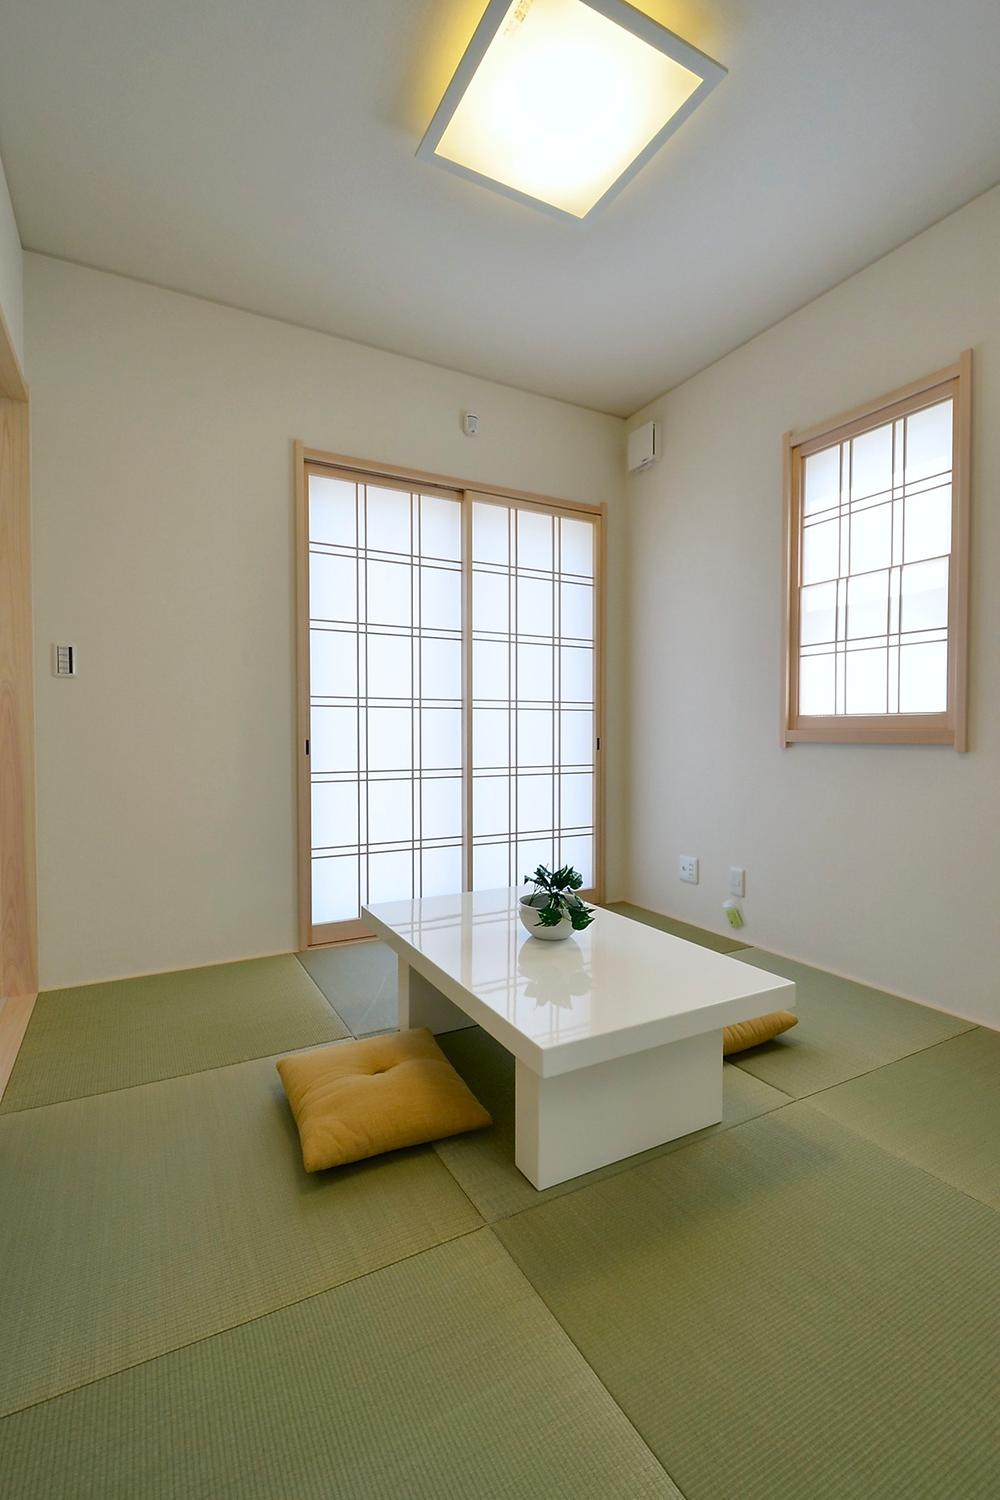 Non-living room. Local model house "Japanese-style" (April 2013 shooting)